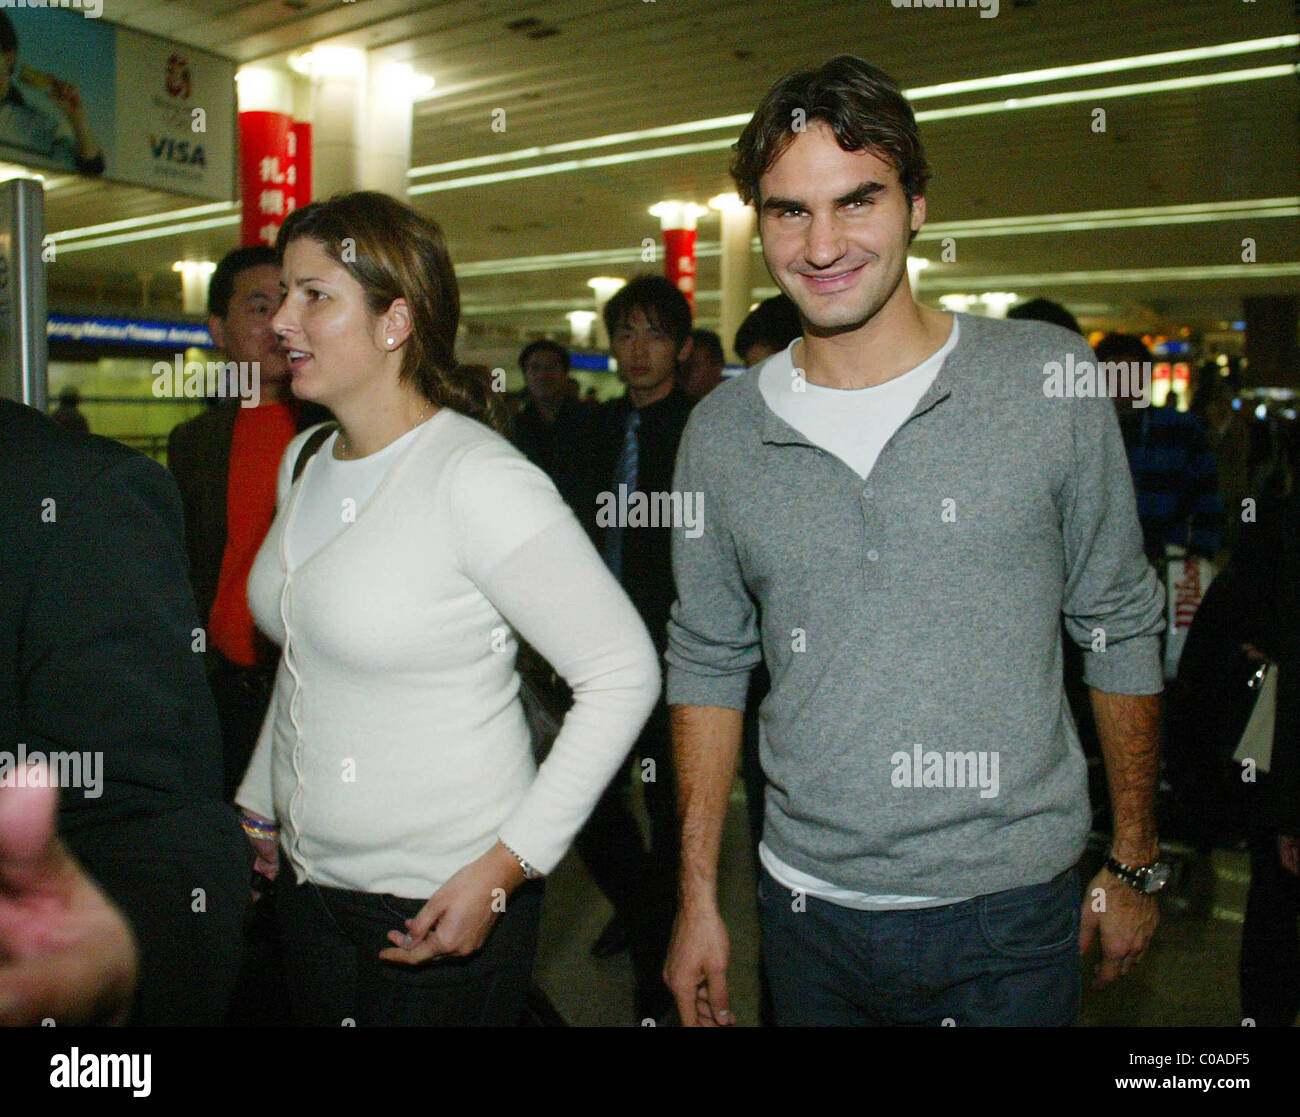 Tennis ace Roger Federer and his girlfriend and agent Mirka Vavrinec arrive at Shanghai International Airport for the Masters Stock Photo